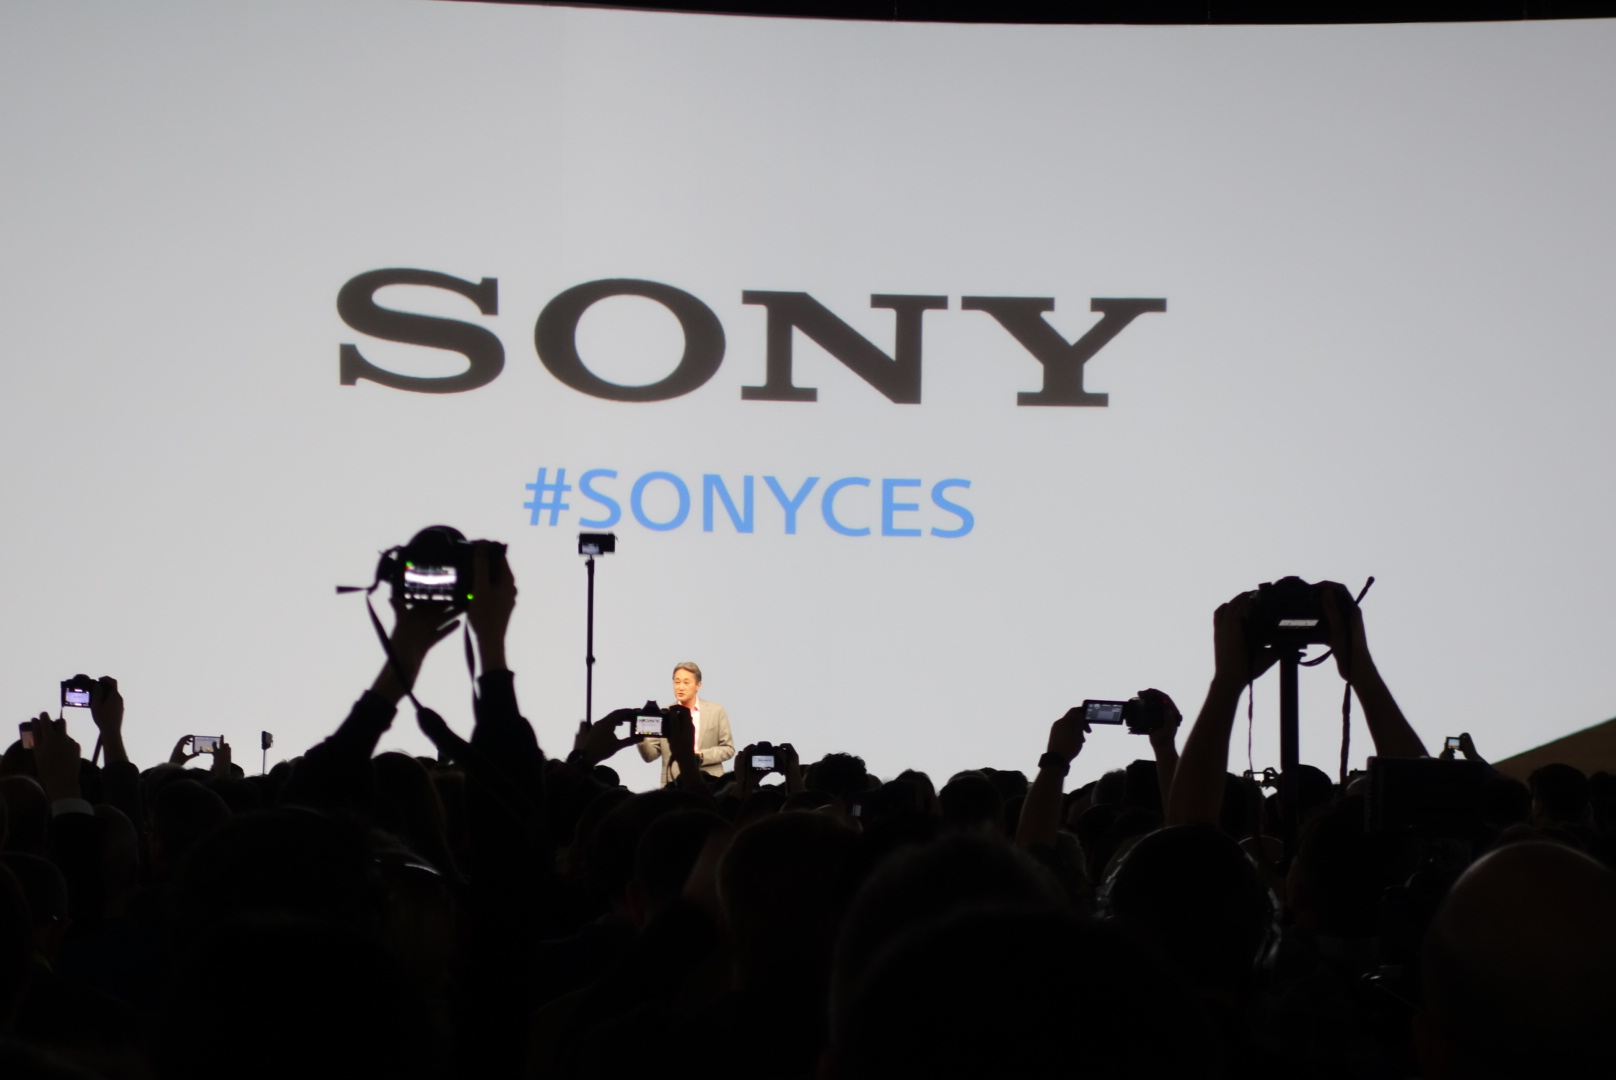 Speaker-Lamps, 4K Action Cams, The Next-Gen Walkman & Other Highlights Of Sony’s New Product Line